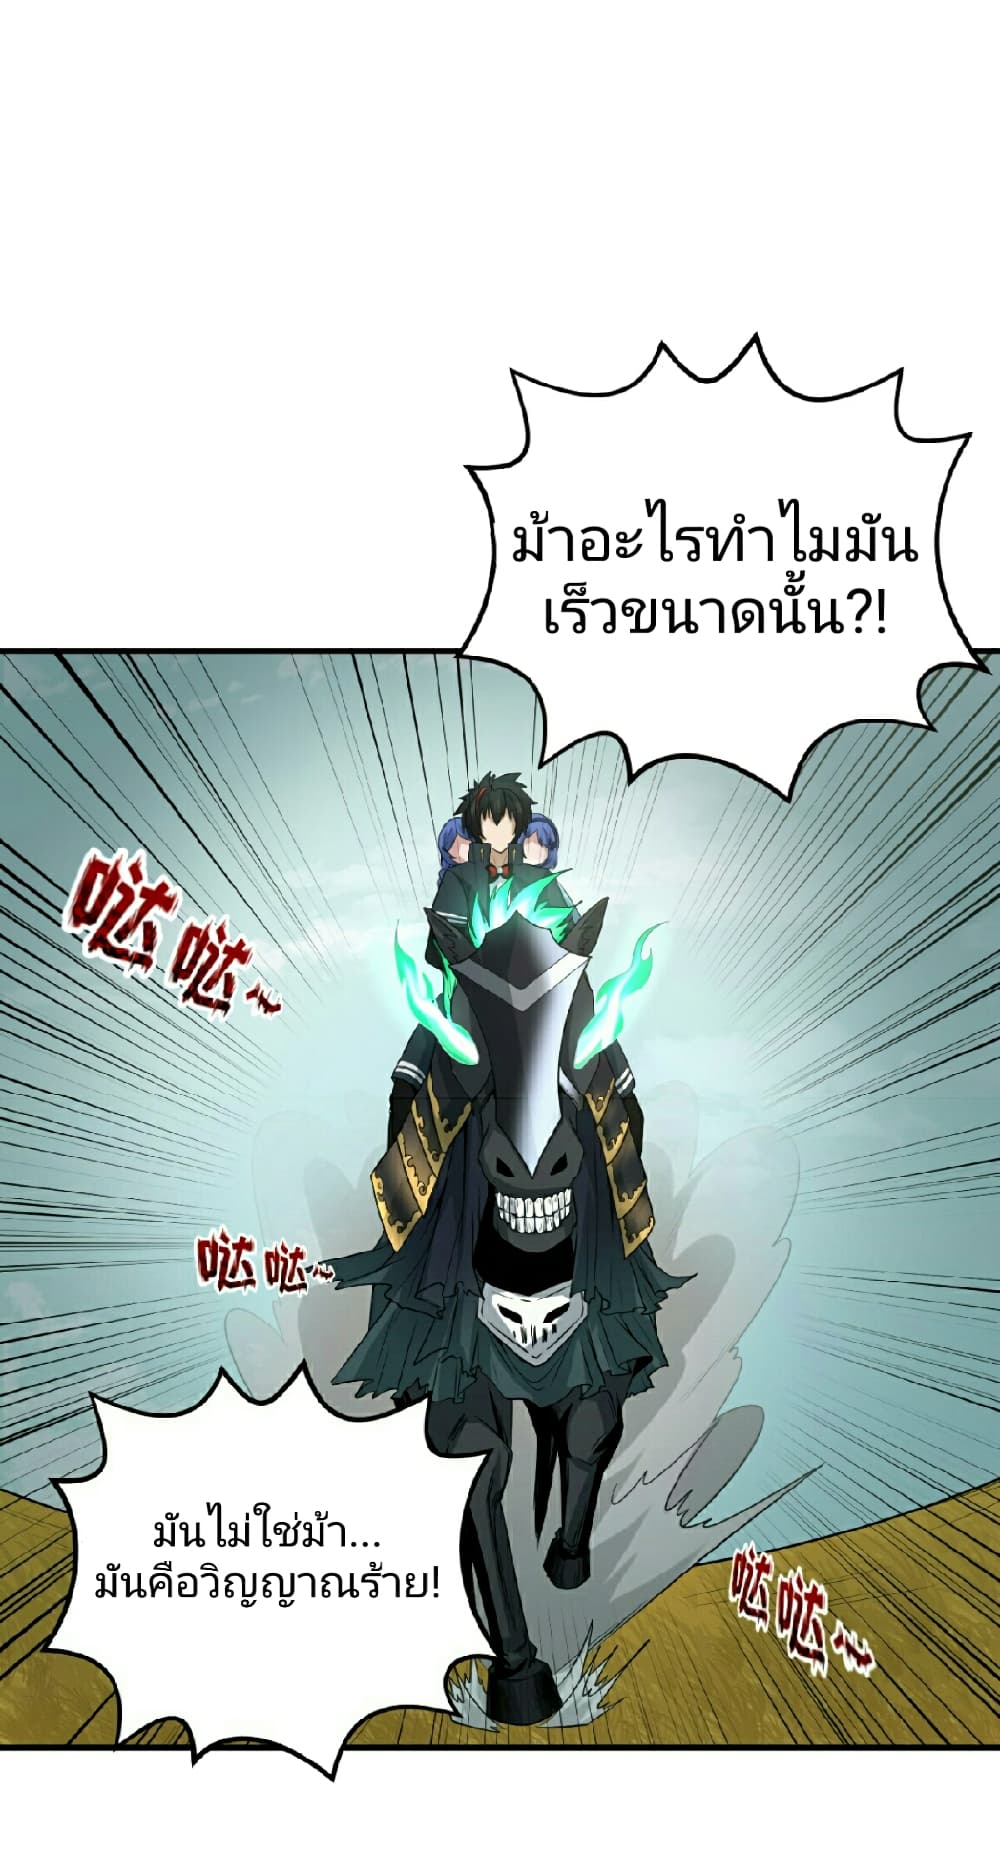 The Age of Ghost Spirits à¸à¸­à¸à¸à¸µà¹ 48 (21)